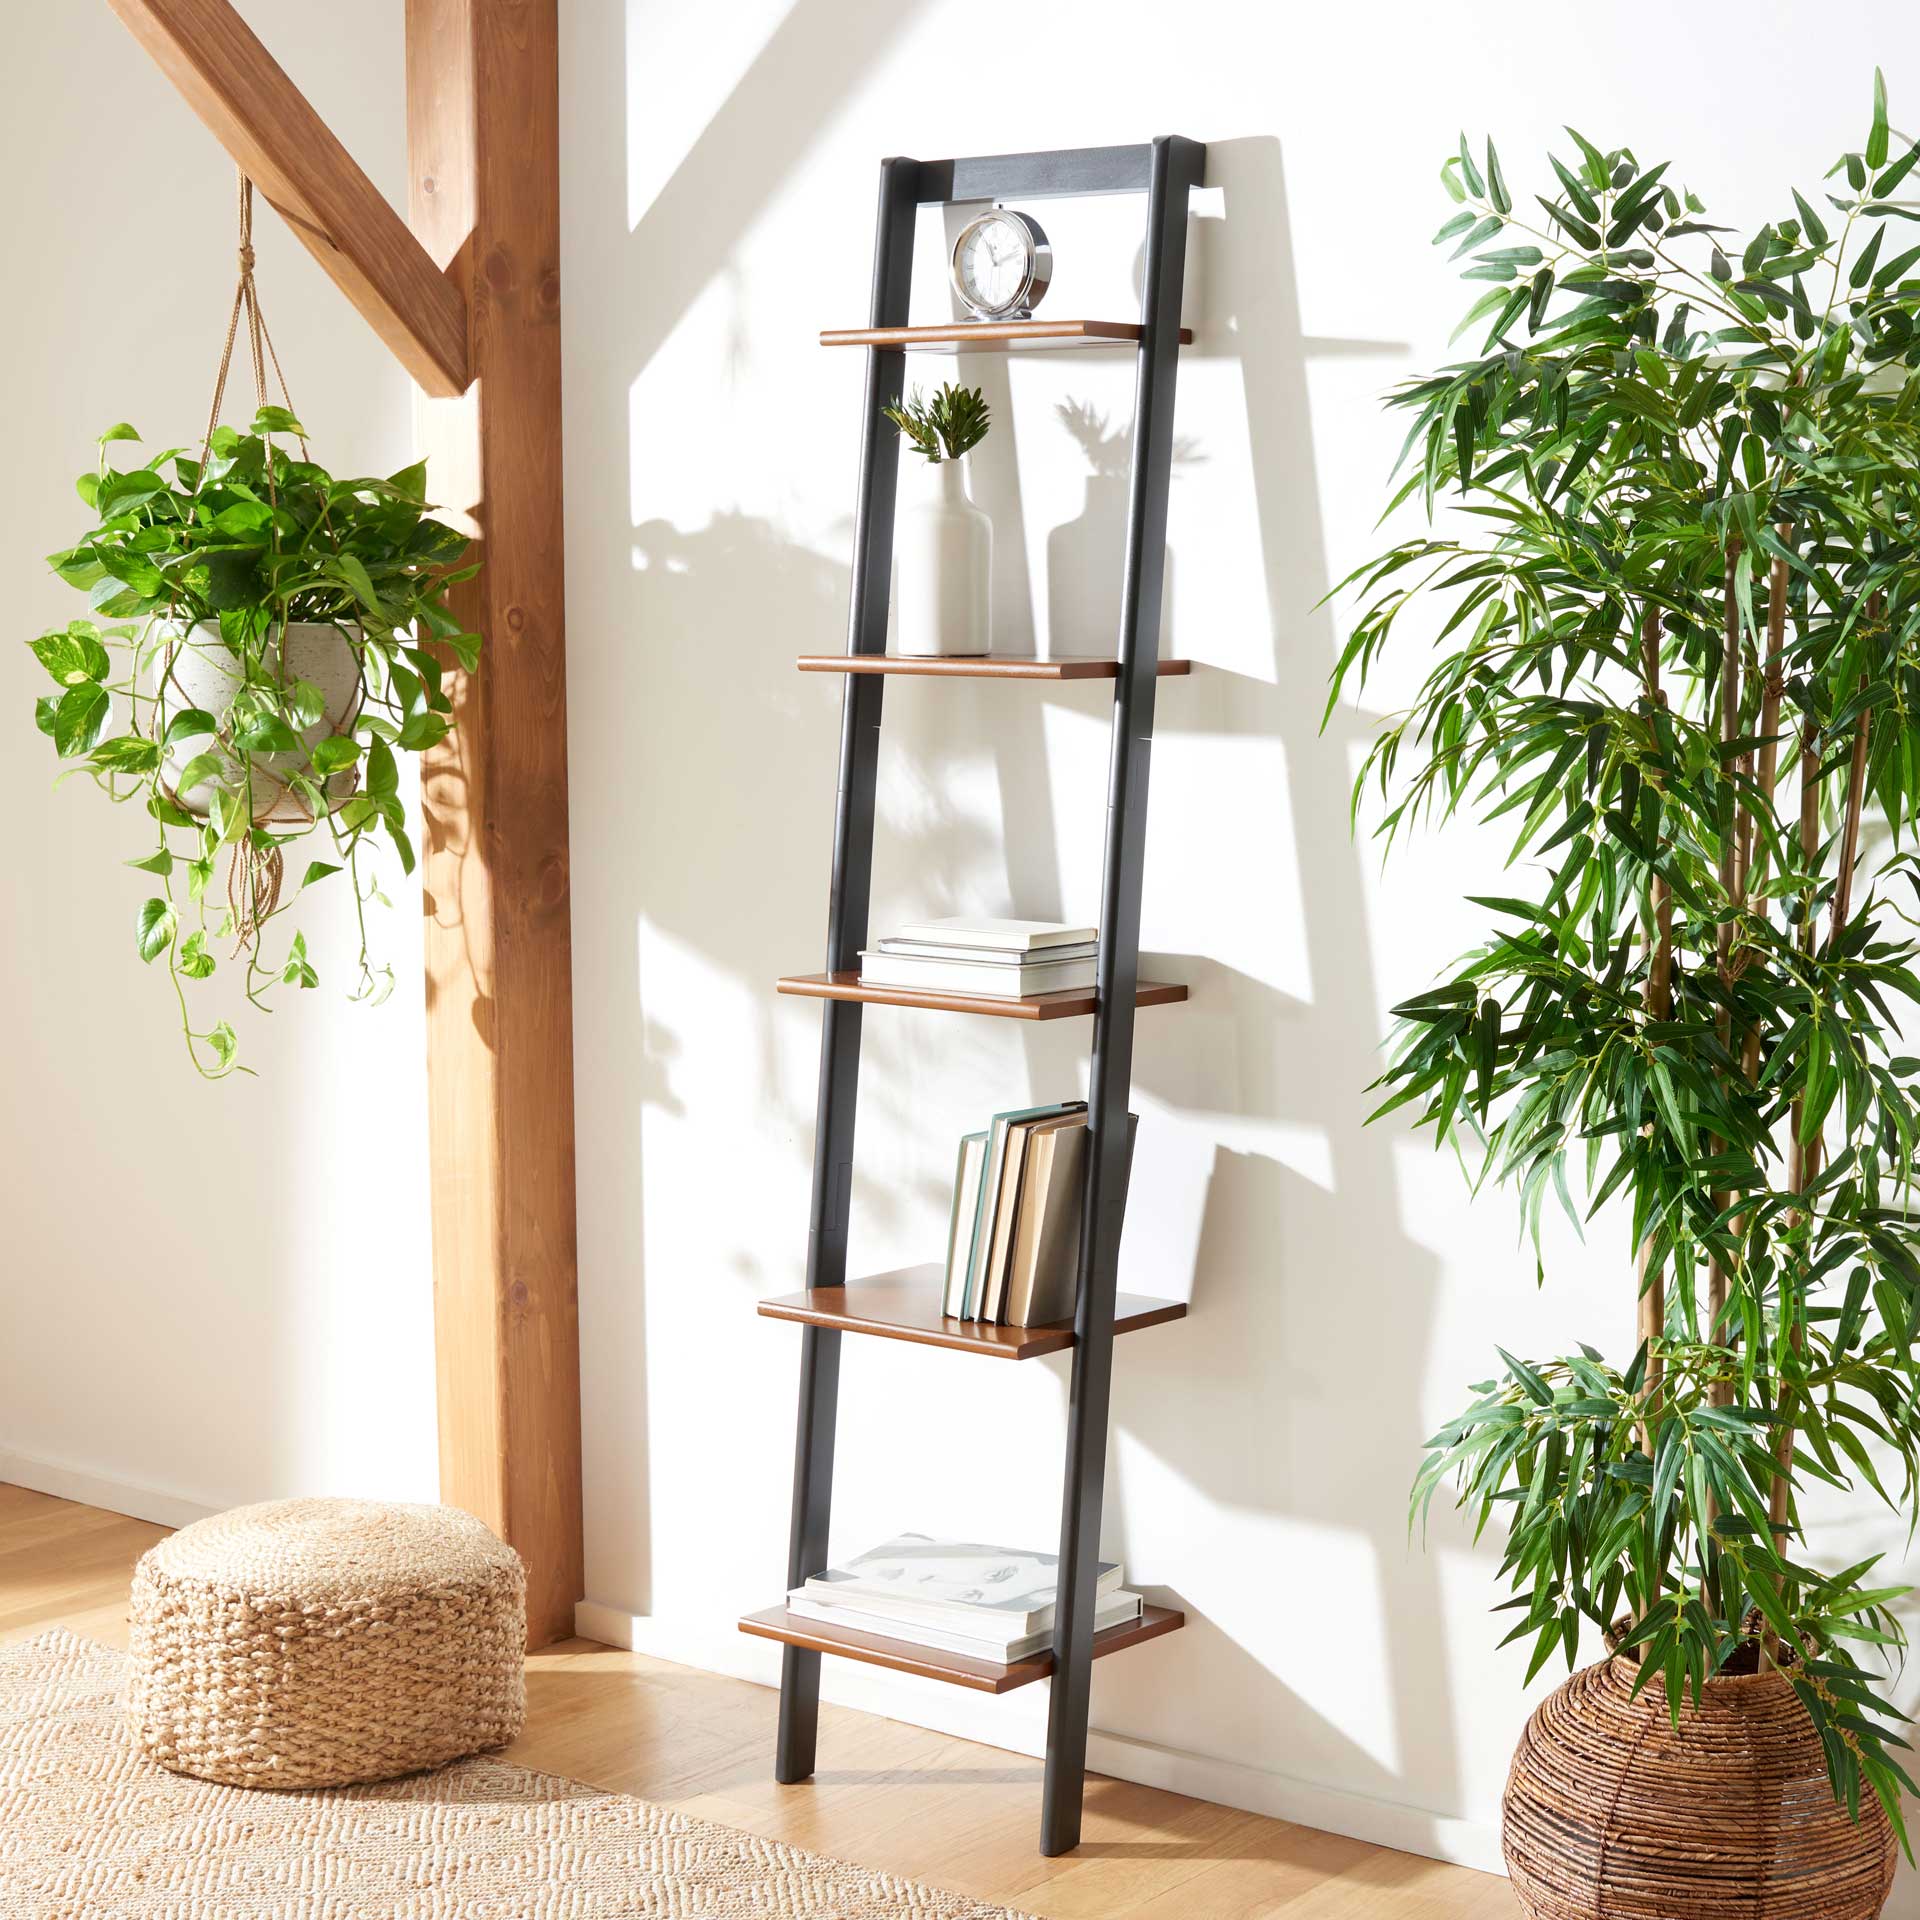 Albina 5 Tier Leaning Etagere Honey Brown/Charcoal